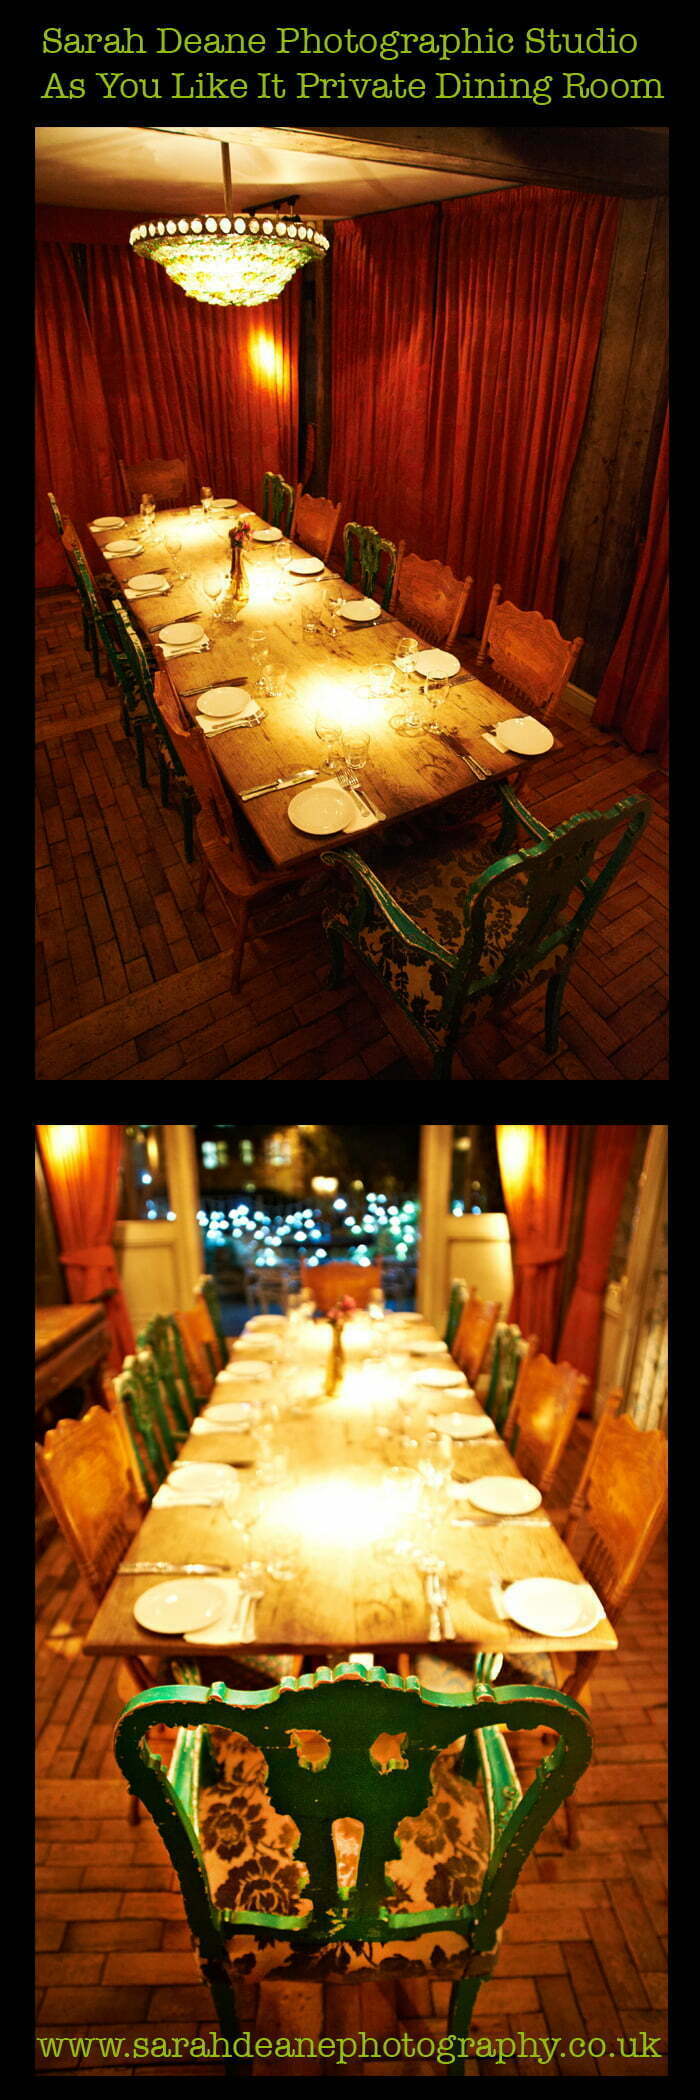 AS YOU LIKE IT JESMOND PRIVATE DINING ROOM